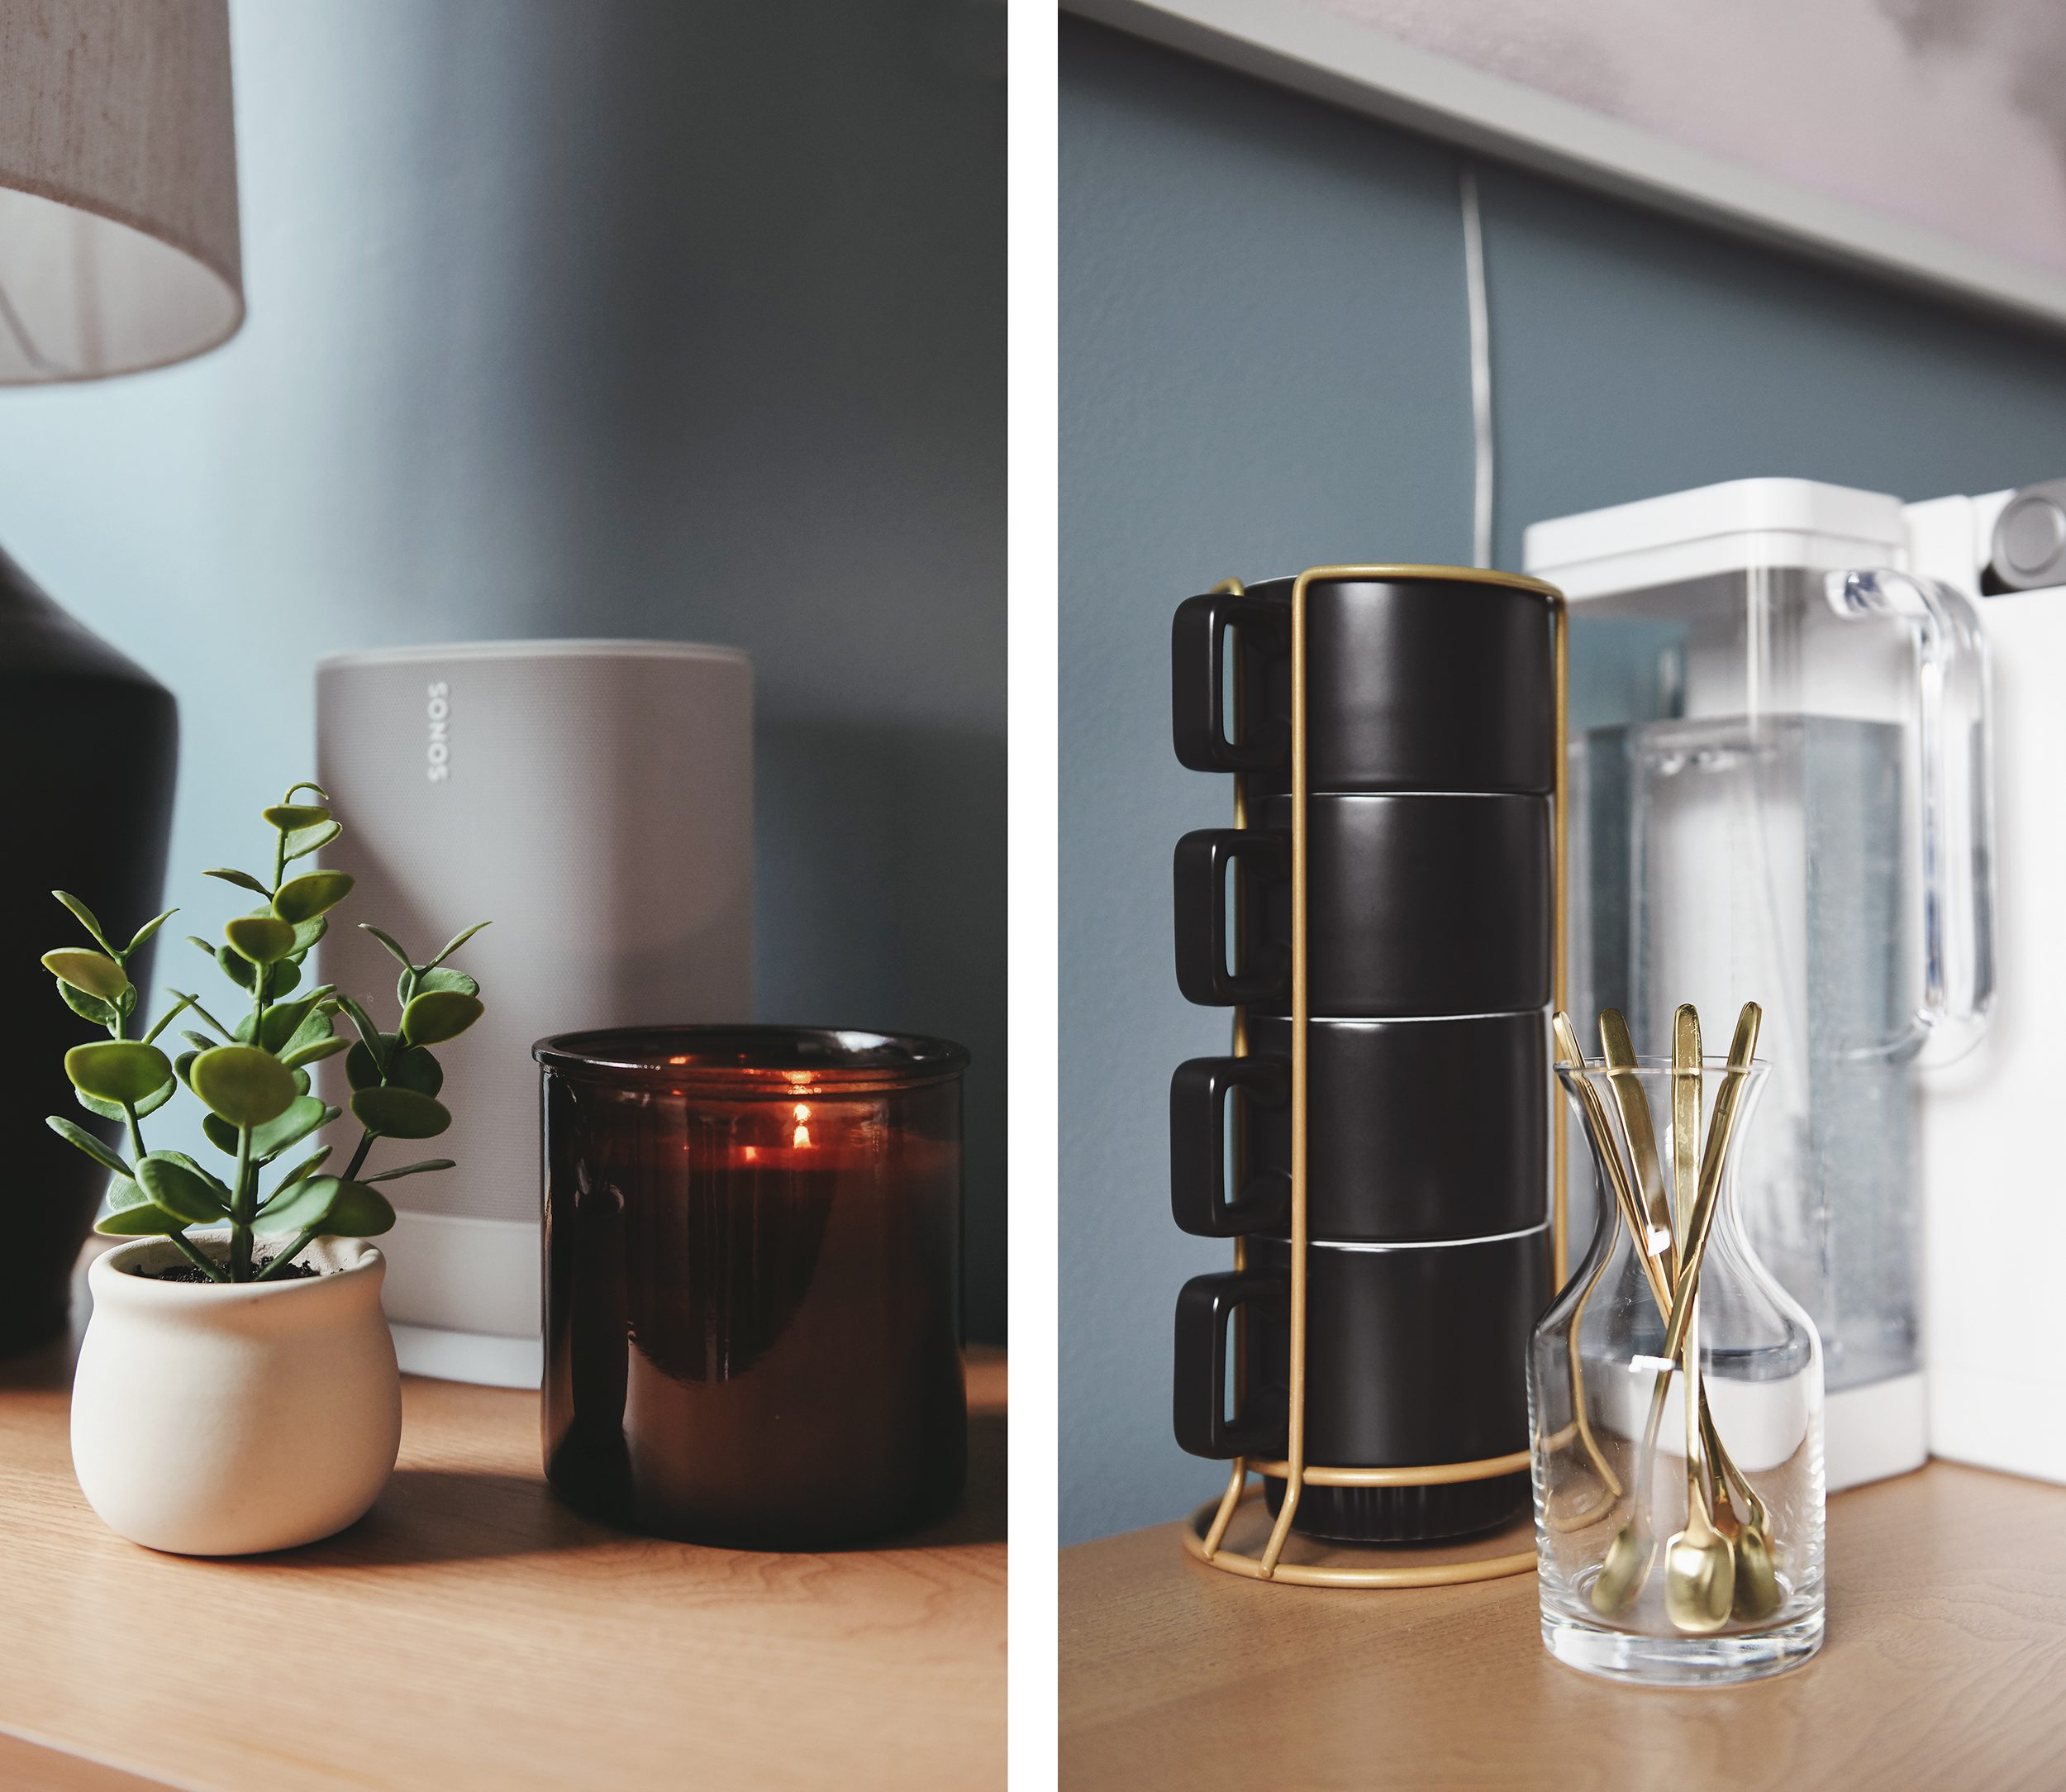 The Sonos speaker, coffee maker and candle set the mood for relaxed functionality // via Yellow Brick Home